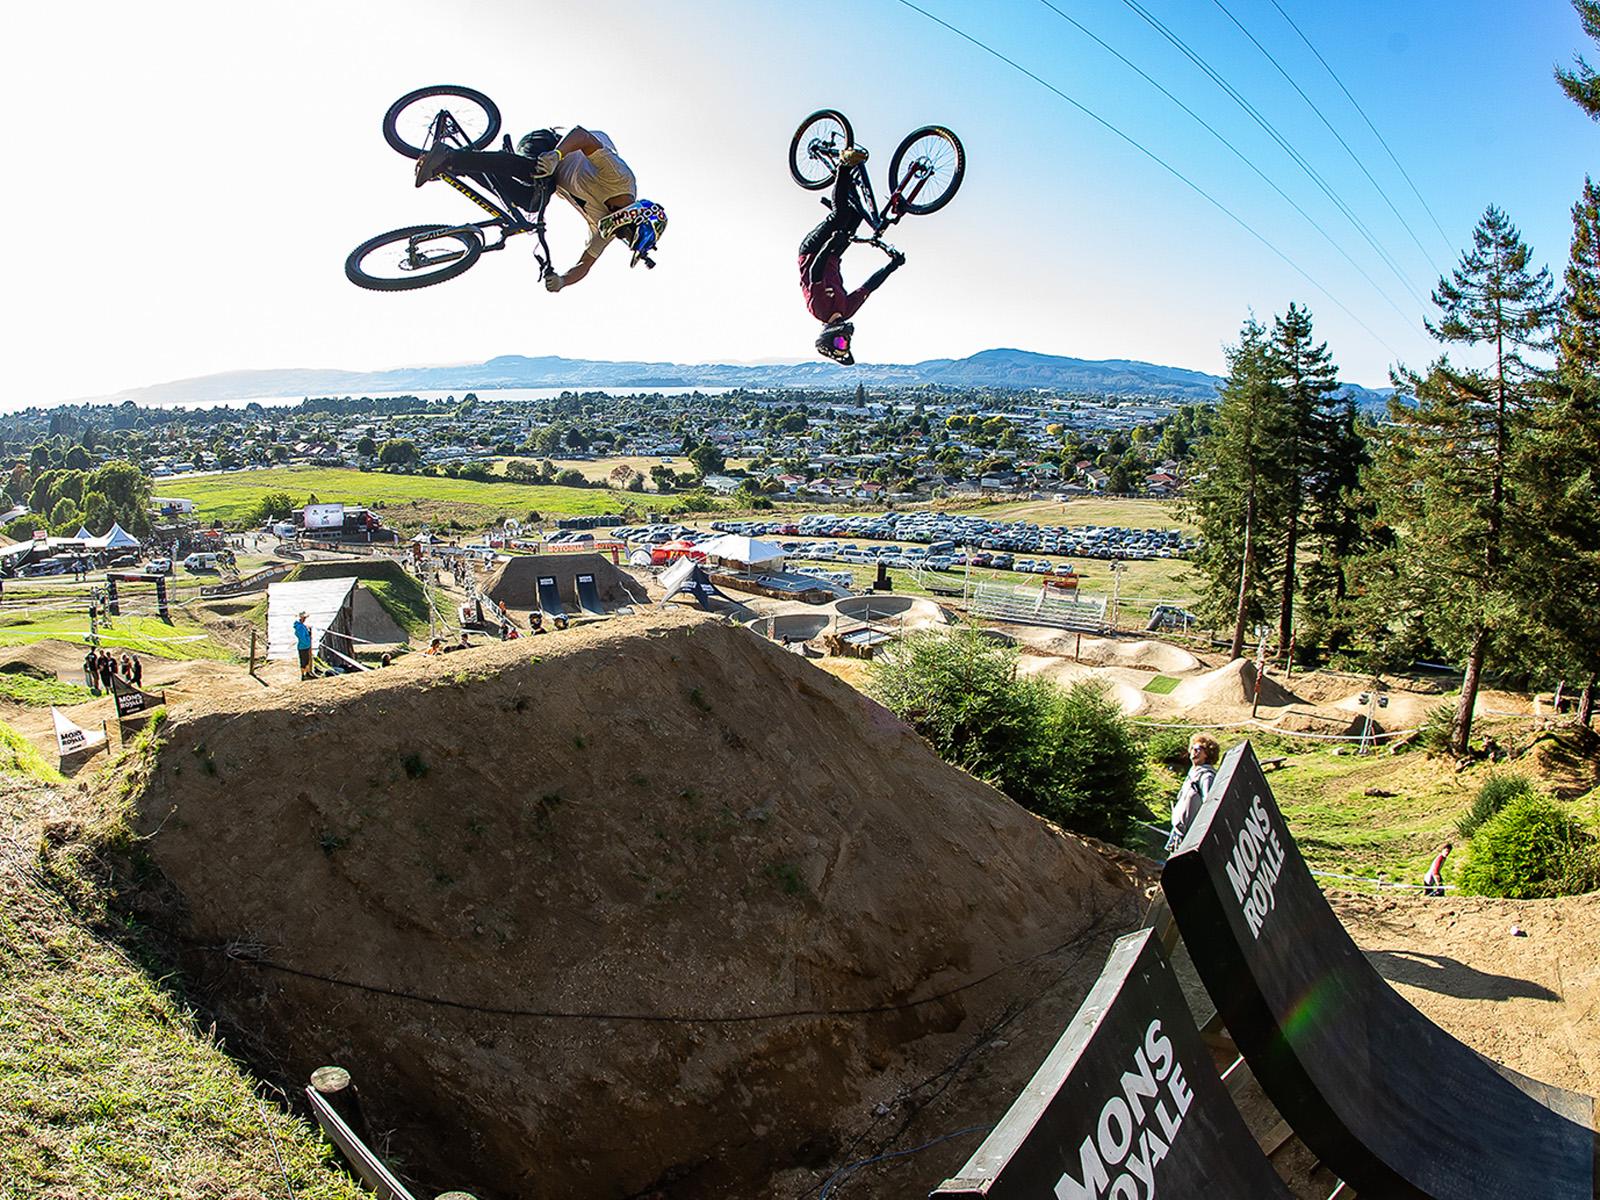 Mountain bike riders in the air doing a flip